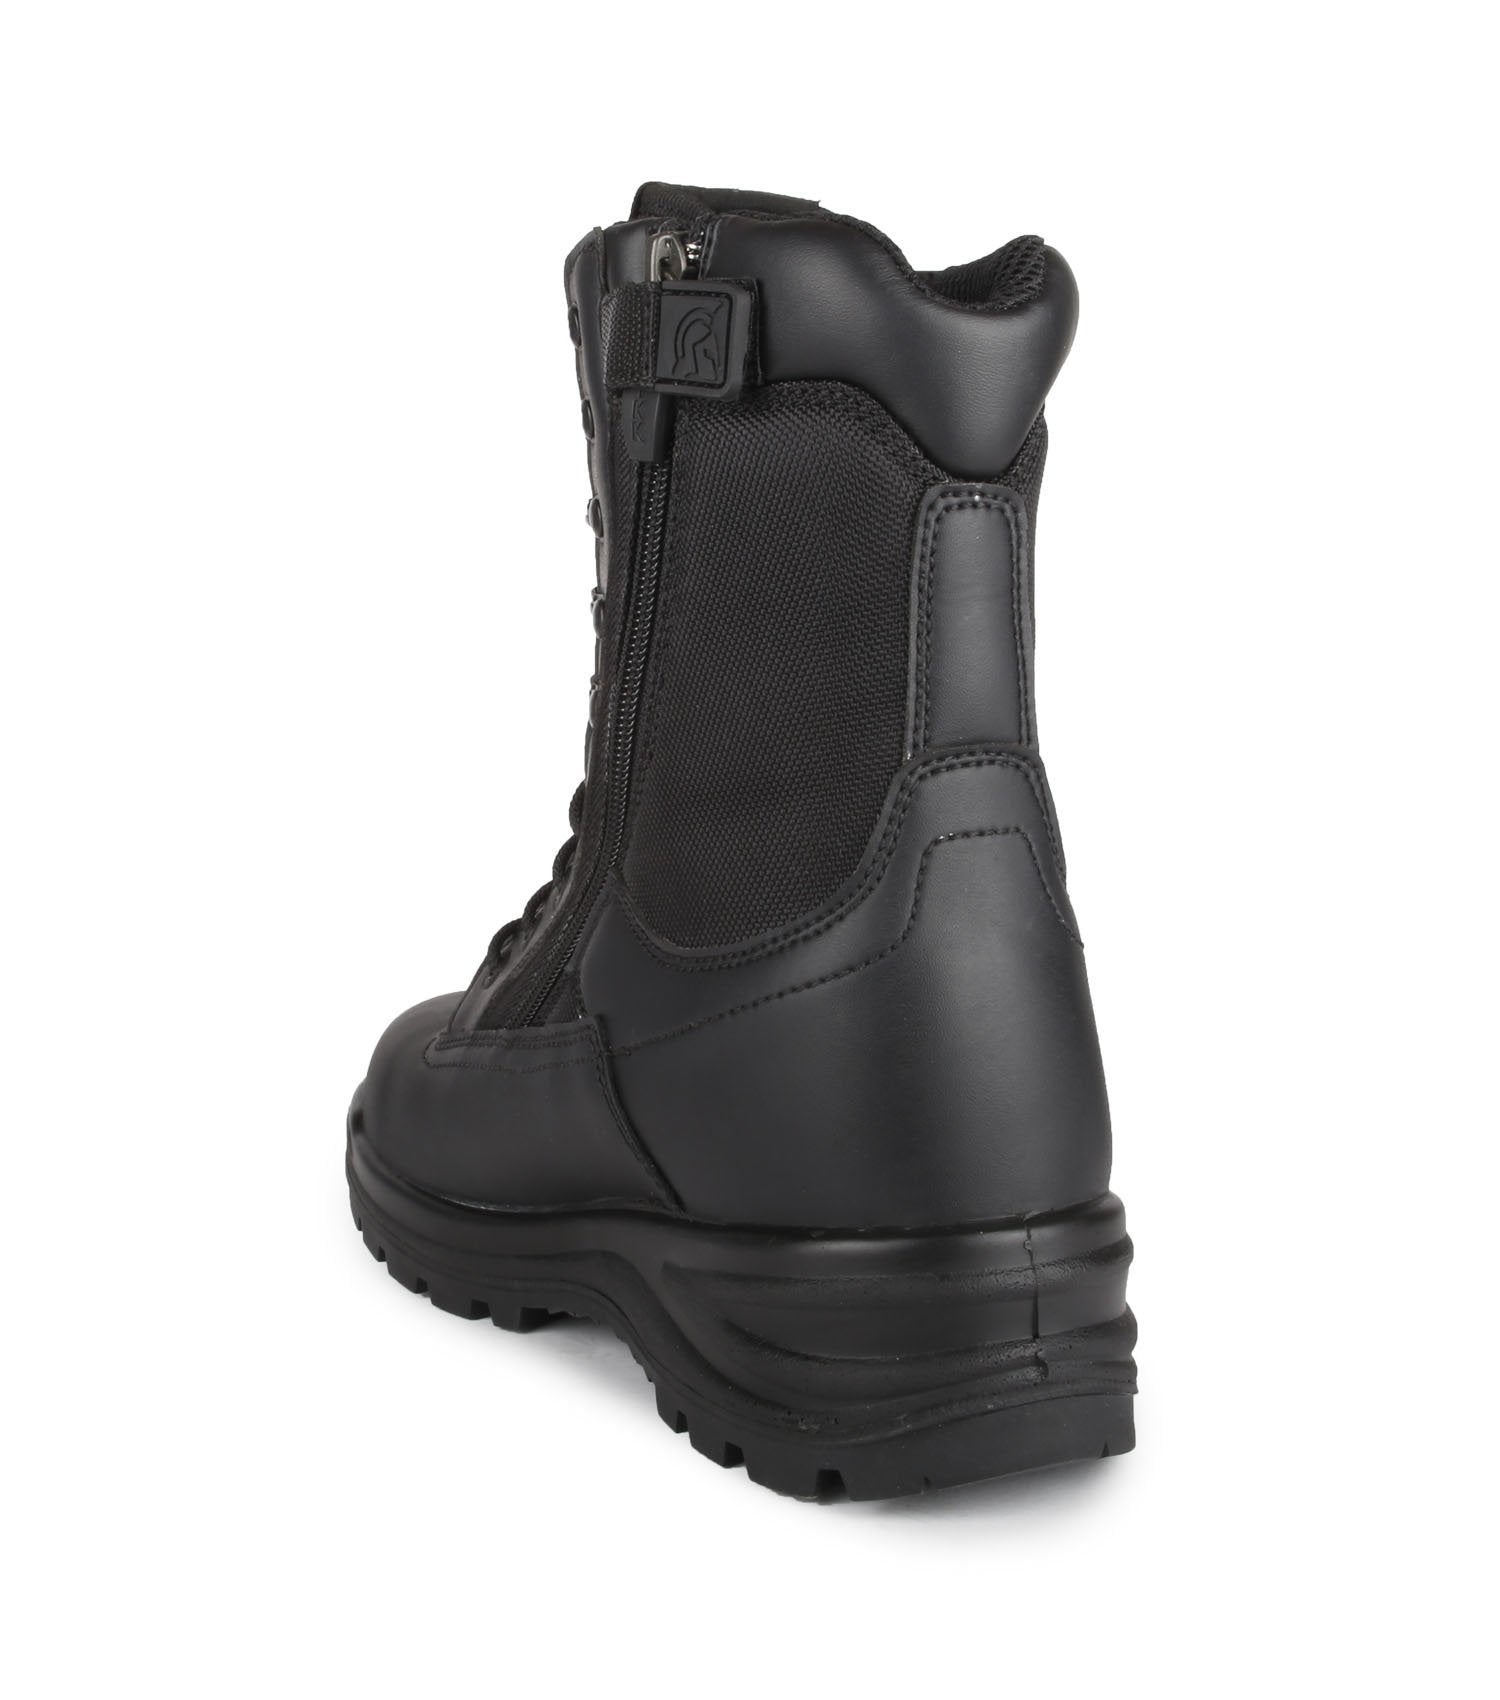 STC 911 EMS / Military Boot with Side-Zip Closure | Black | Sizes 6 - 14 Work Boots - Cleanflow